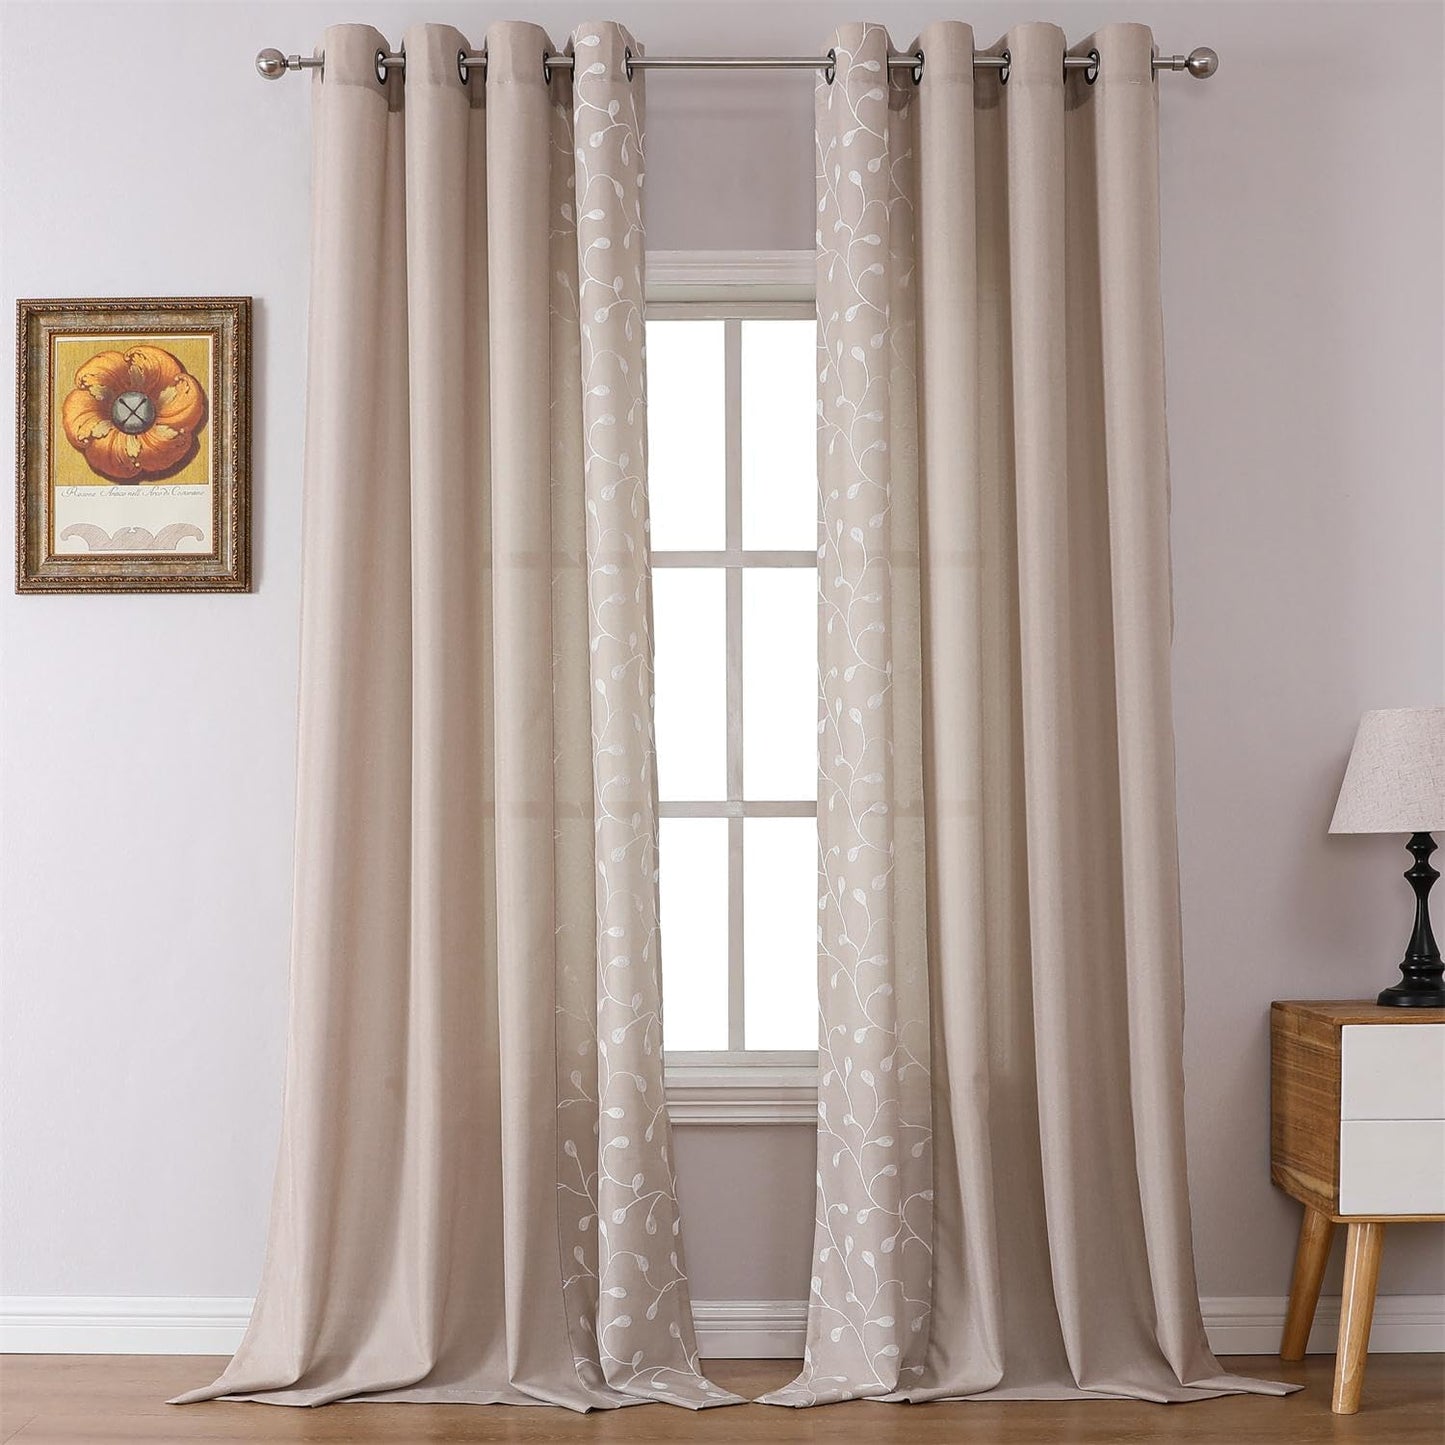 MIUCO Floral Embroidered Semi Sheer Curtains Faux Linen Grommet Curtains for Girls Room 52 X 84 Inch Set of 2, off White  MIUCO Mix  Match - Linen 52X84 Inch 